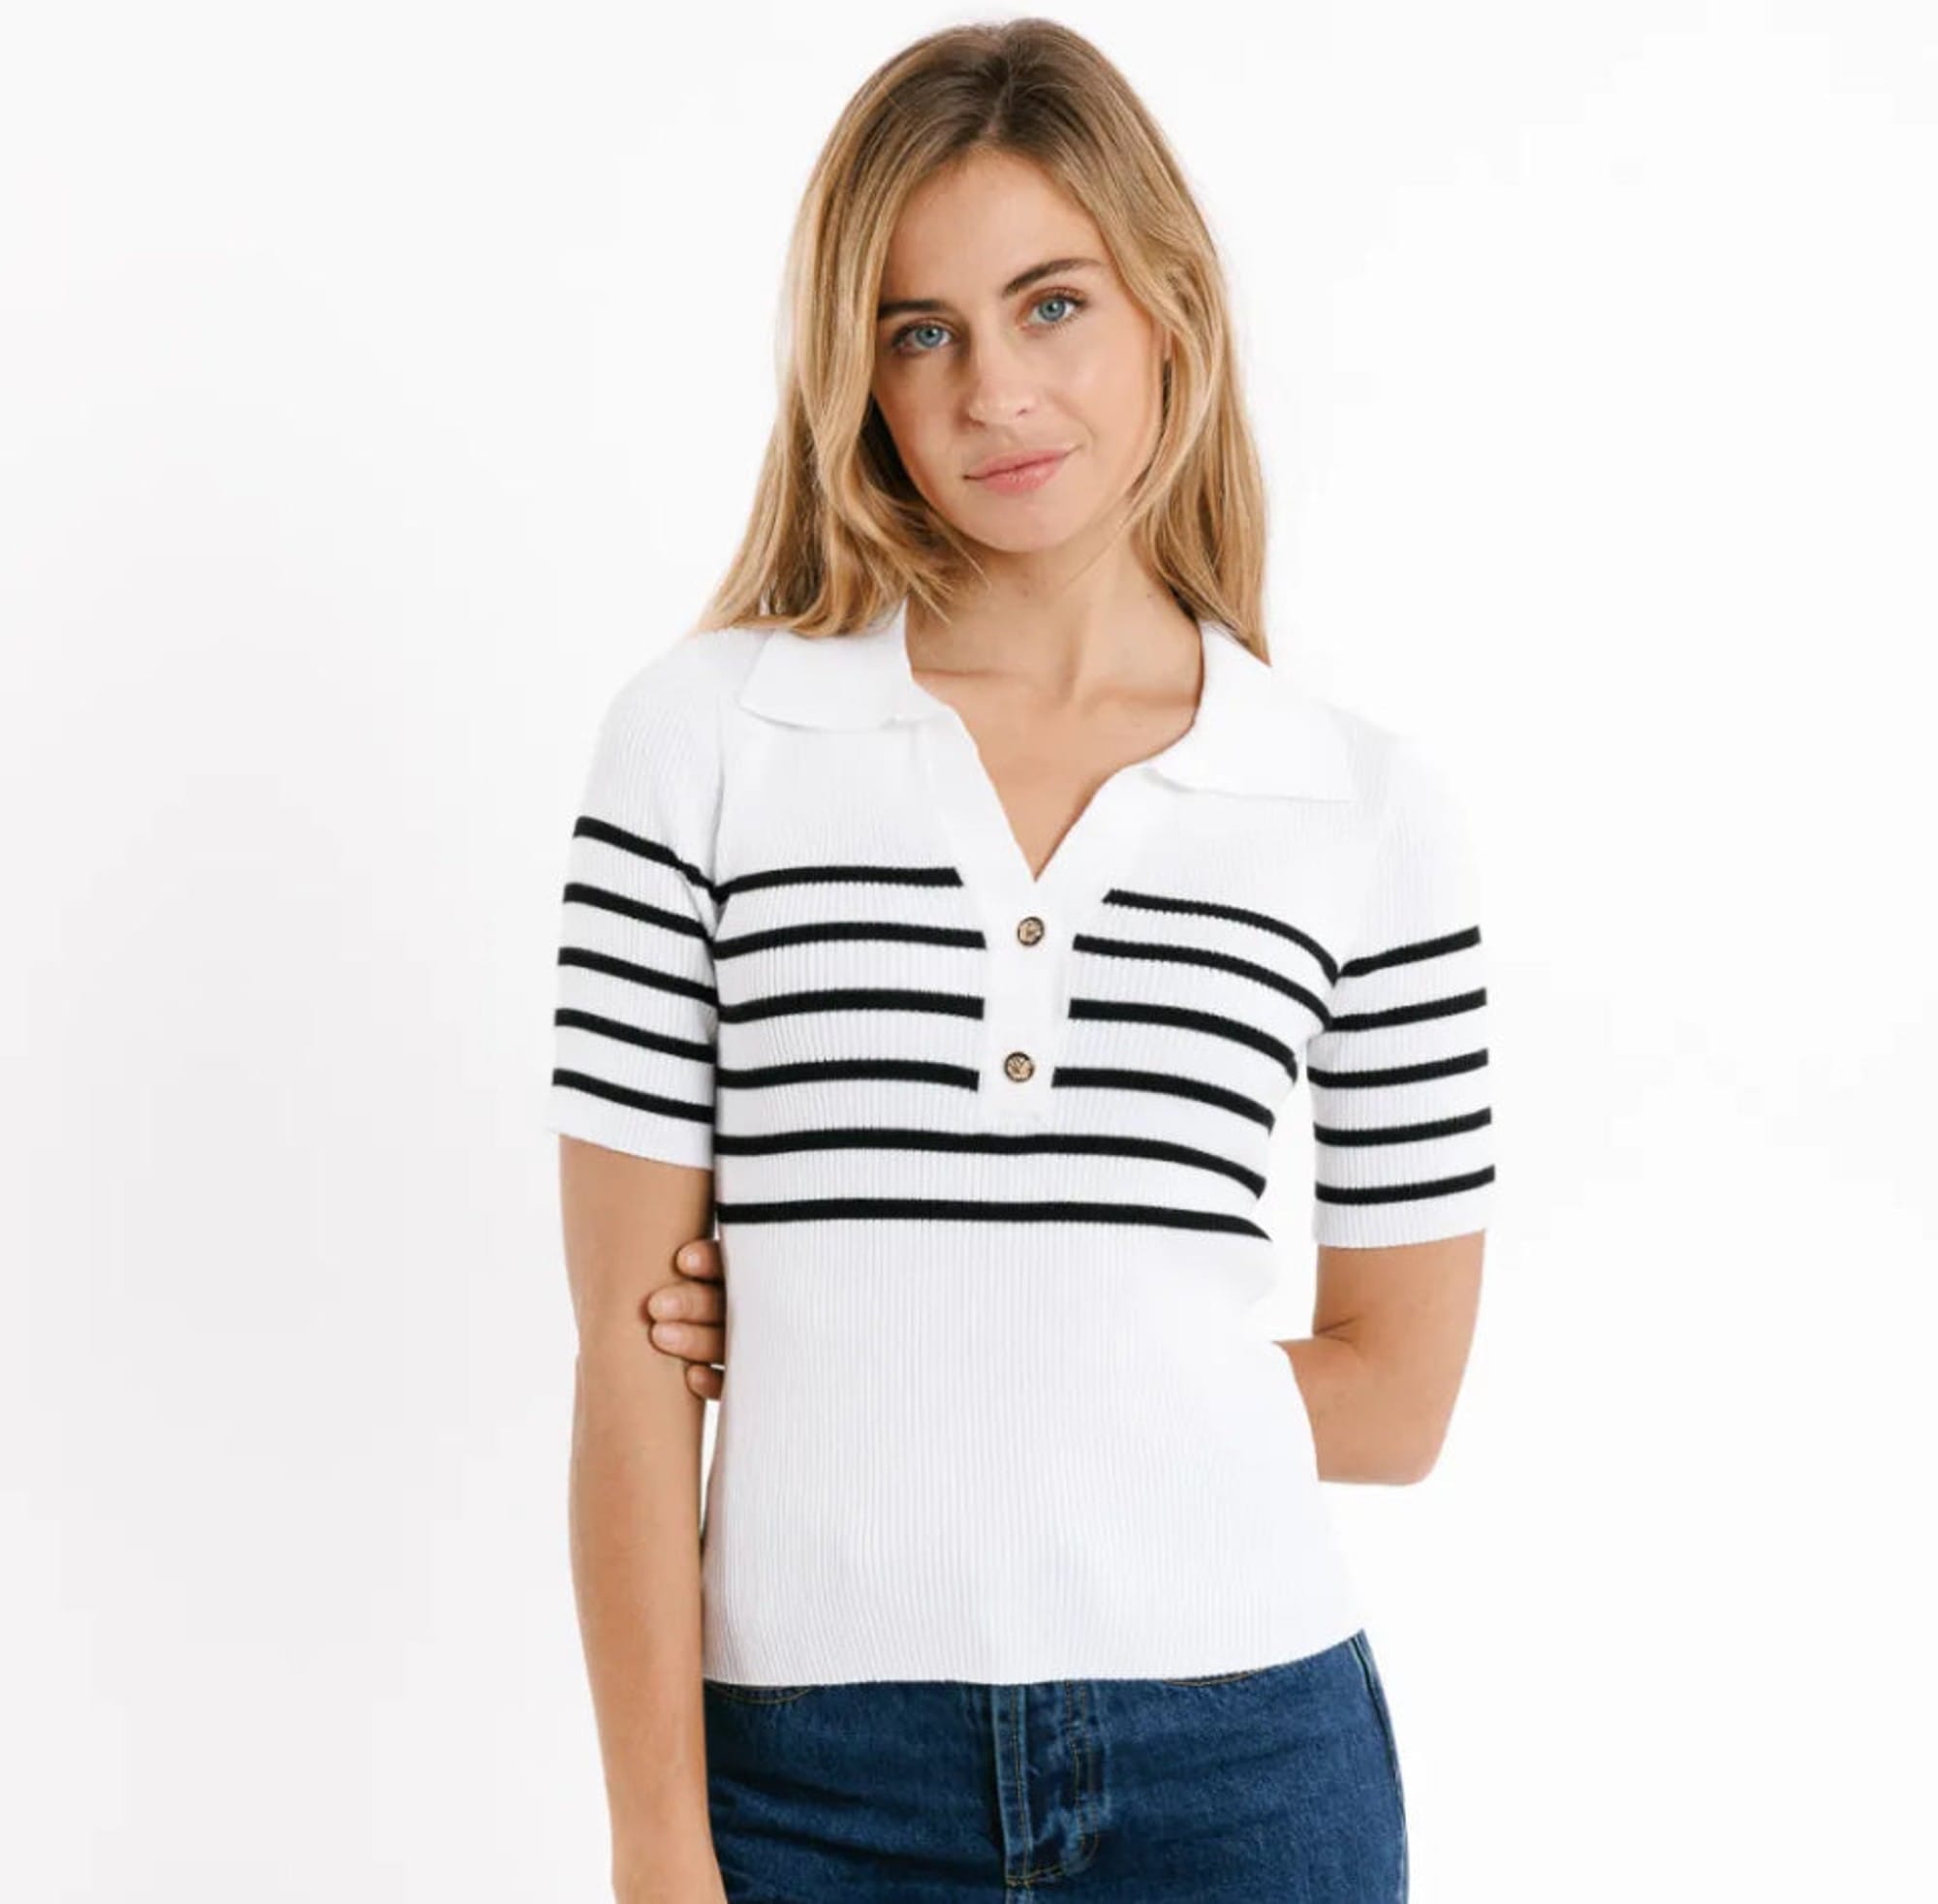 Sweewe French Polo Knit in White - clever alice